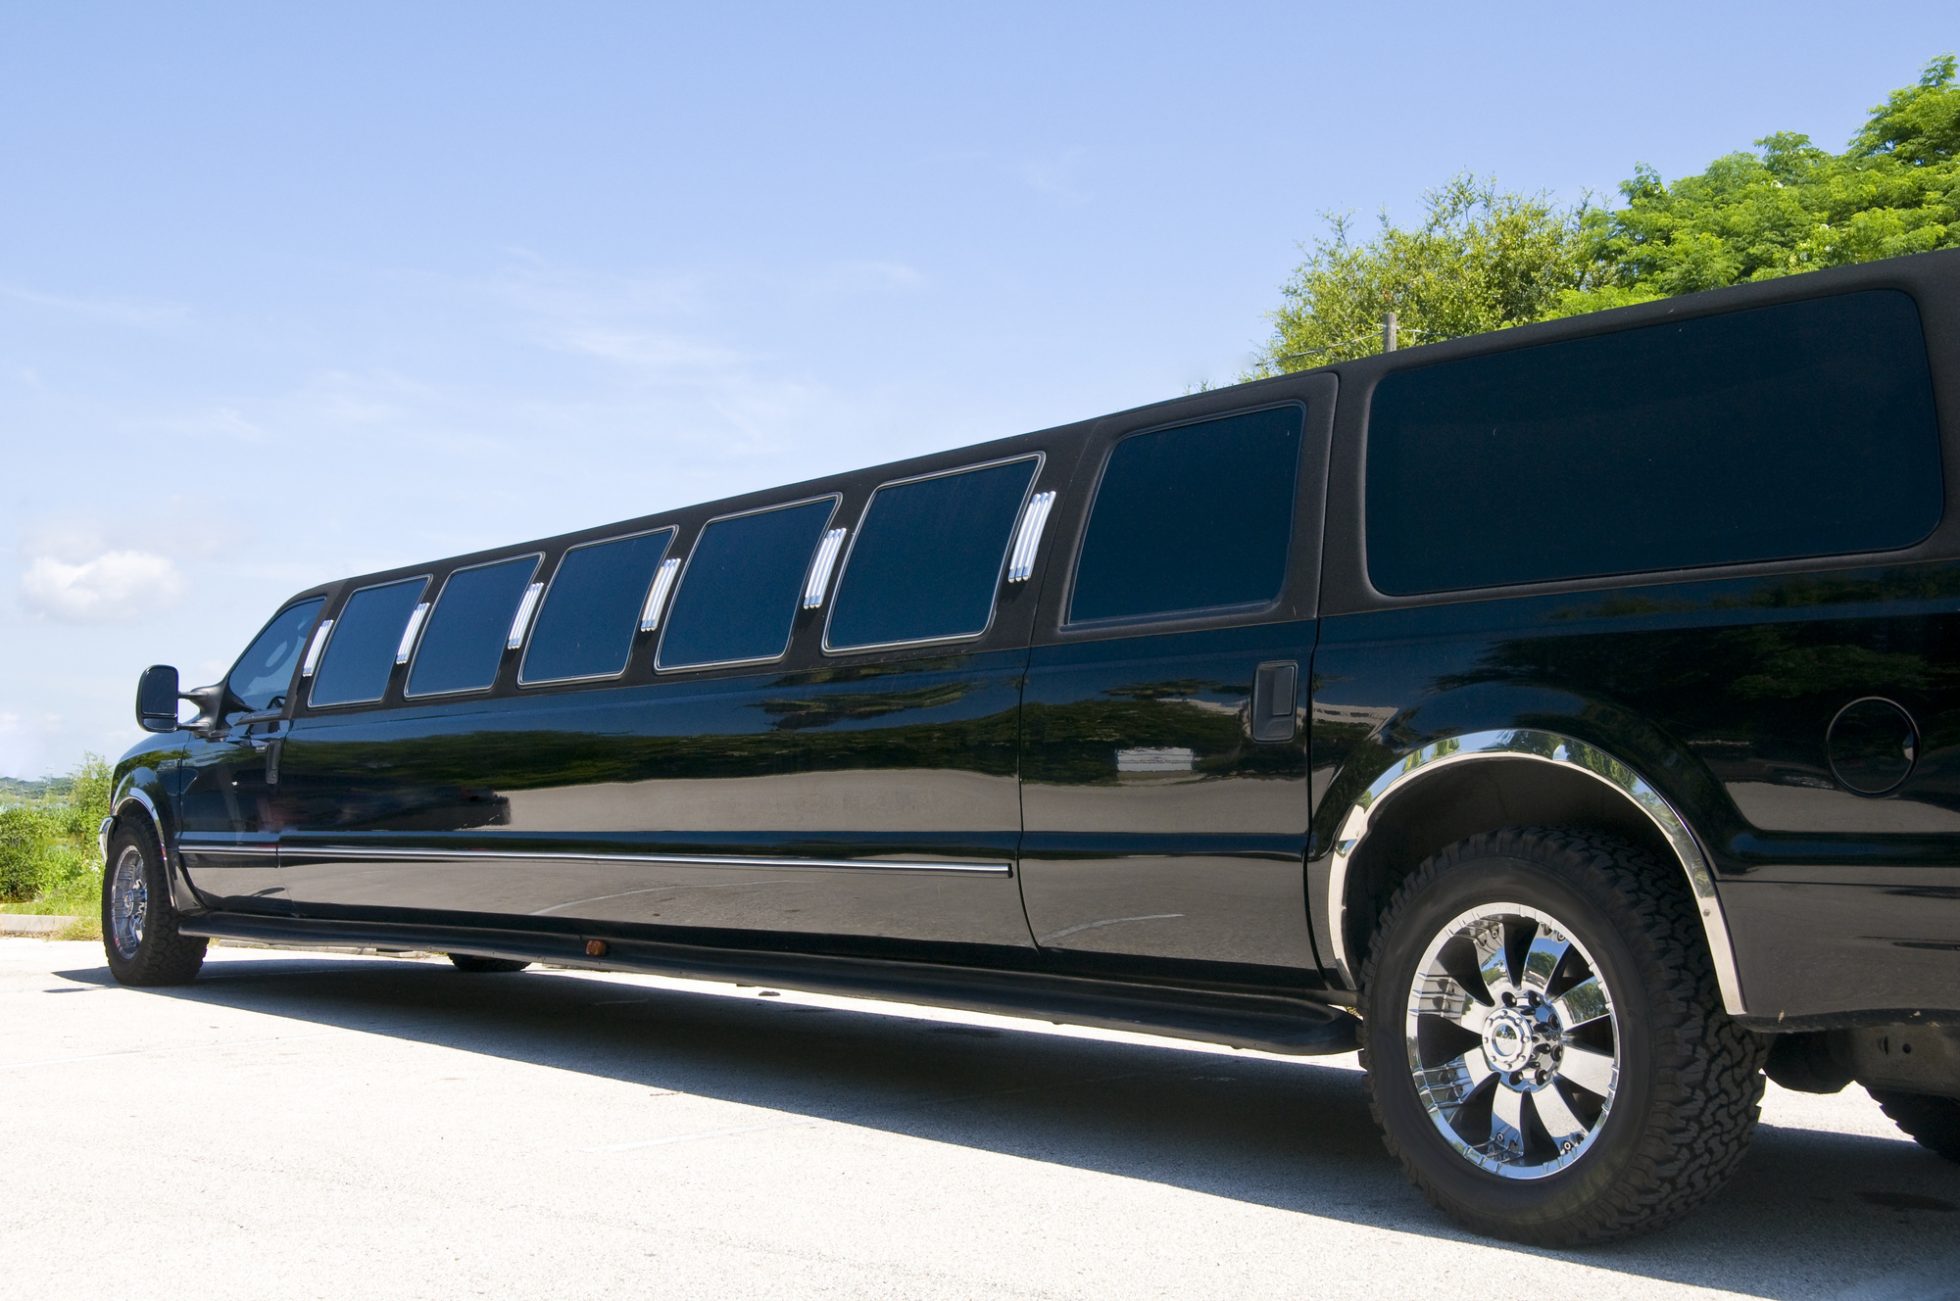 Find The Right Limousine